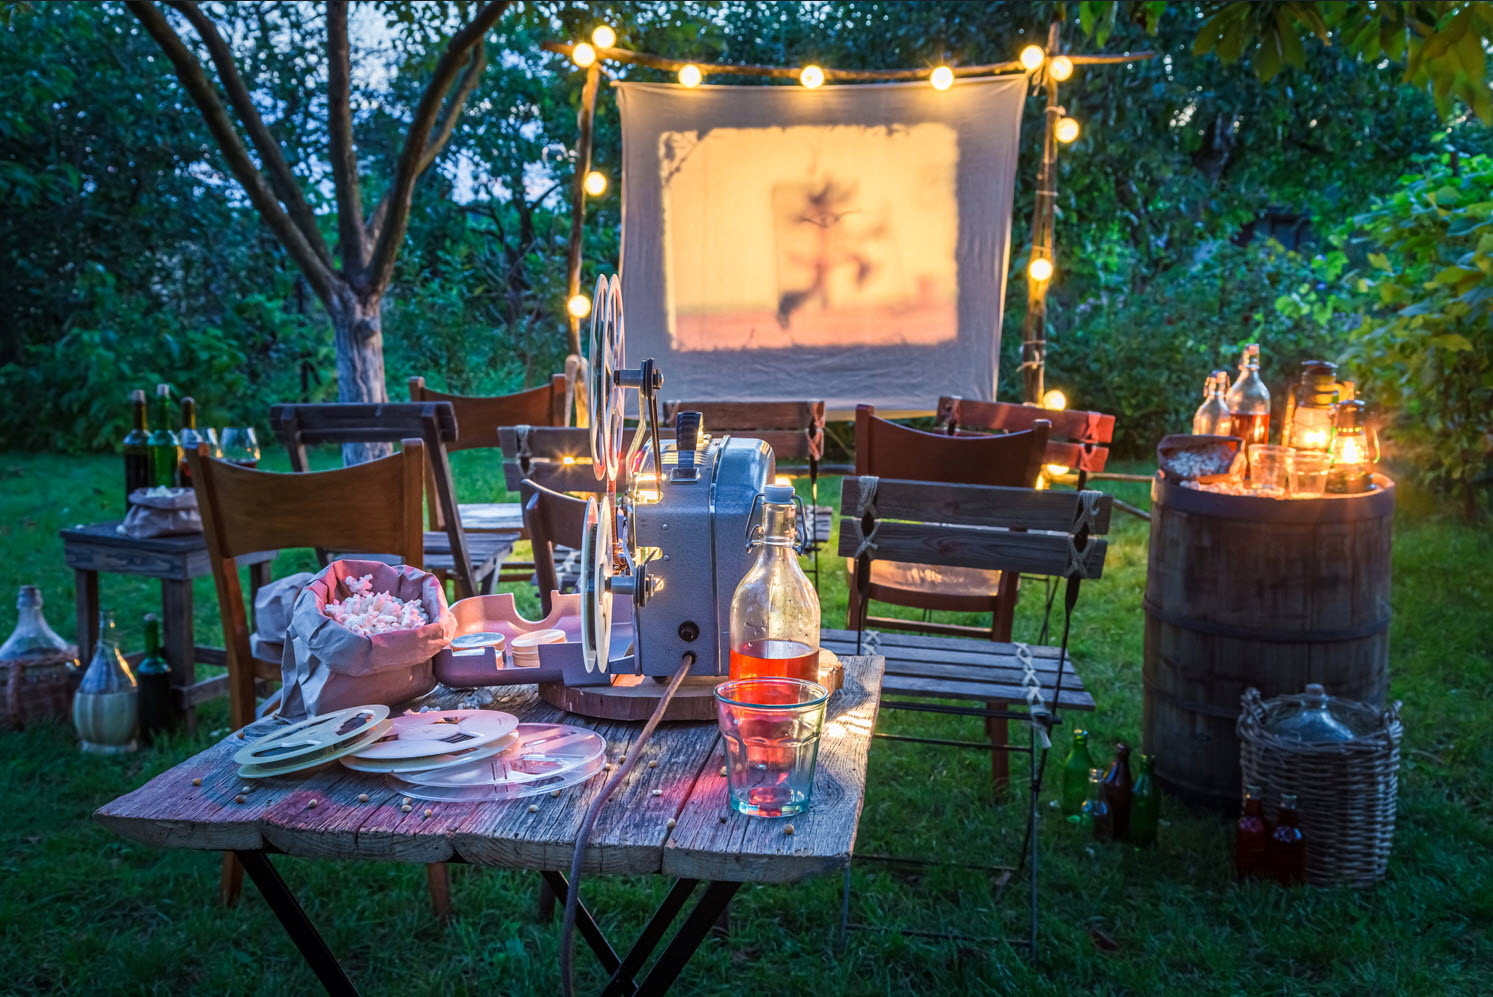 Open air summer cinema with drinks and snacks